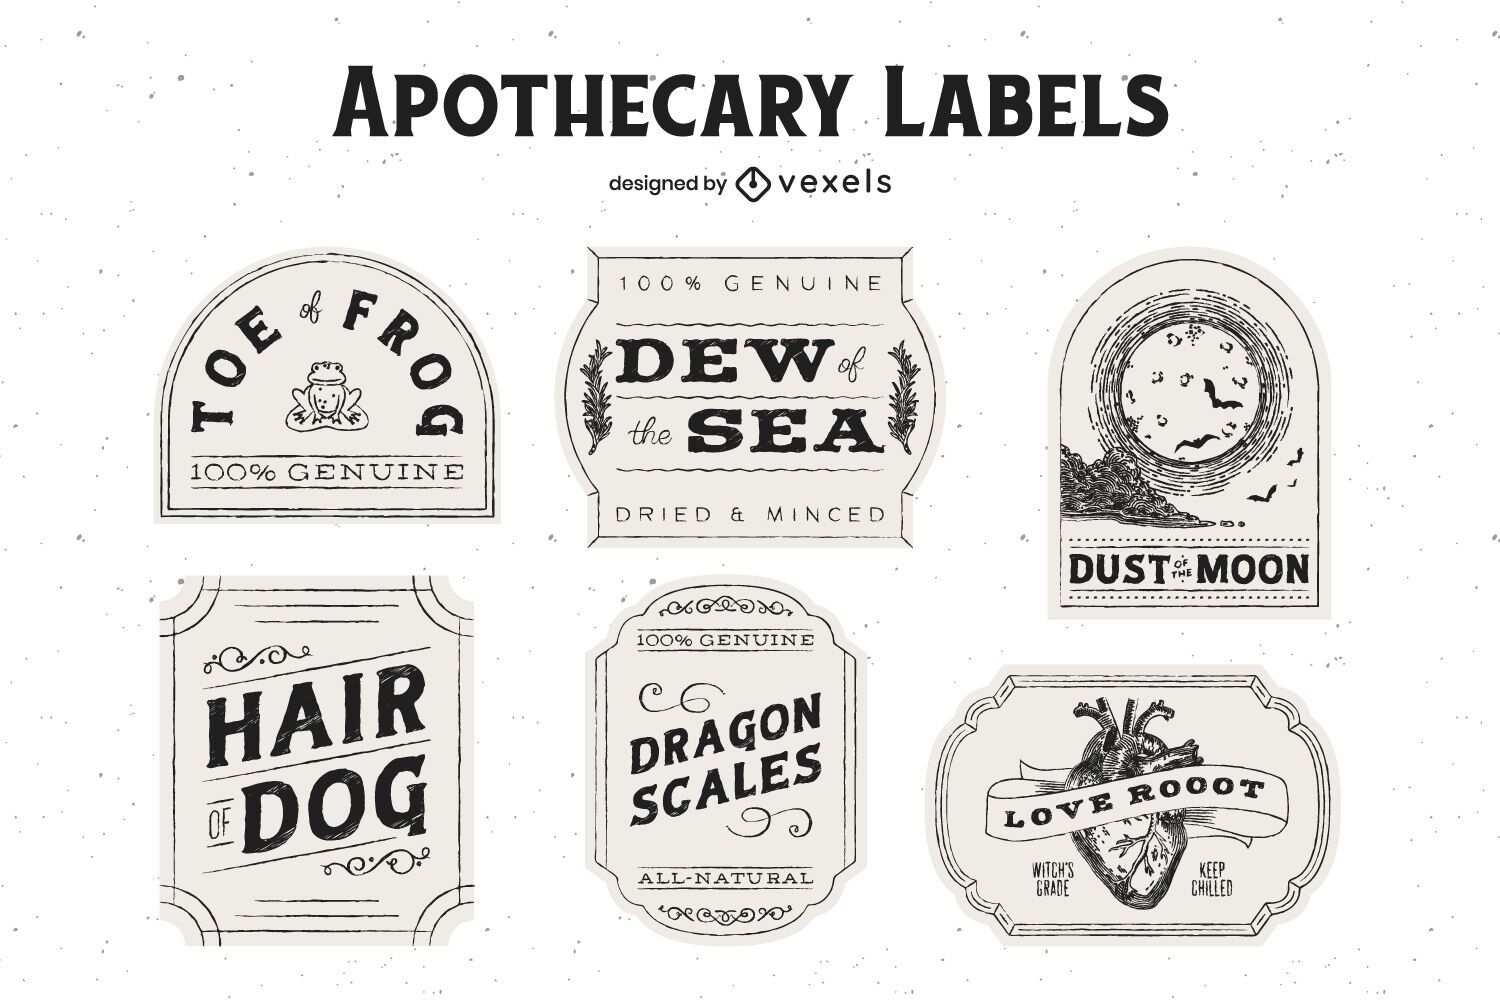 Clear Apothecary Sticker